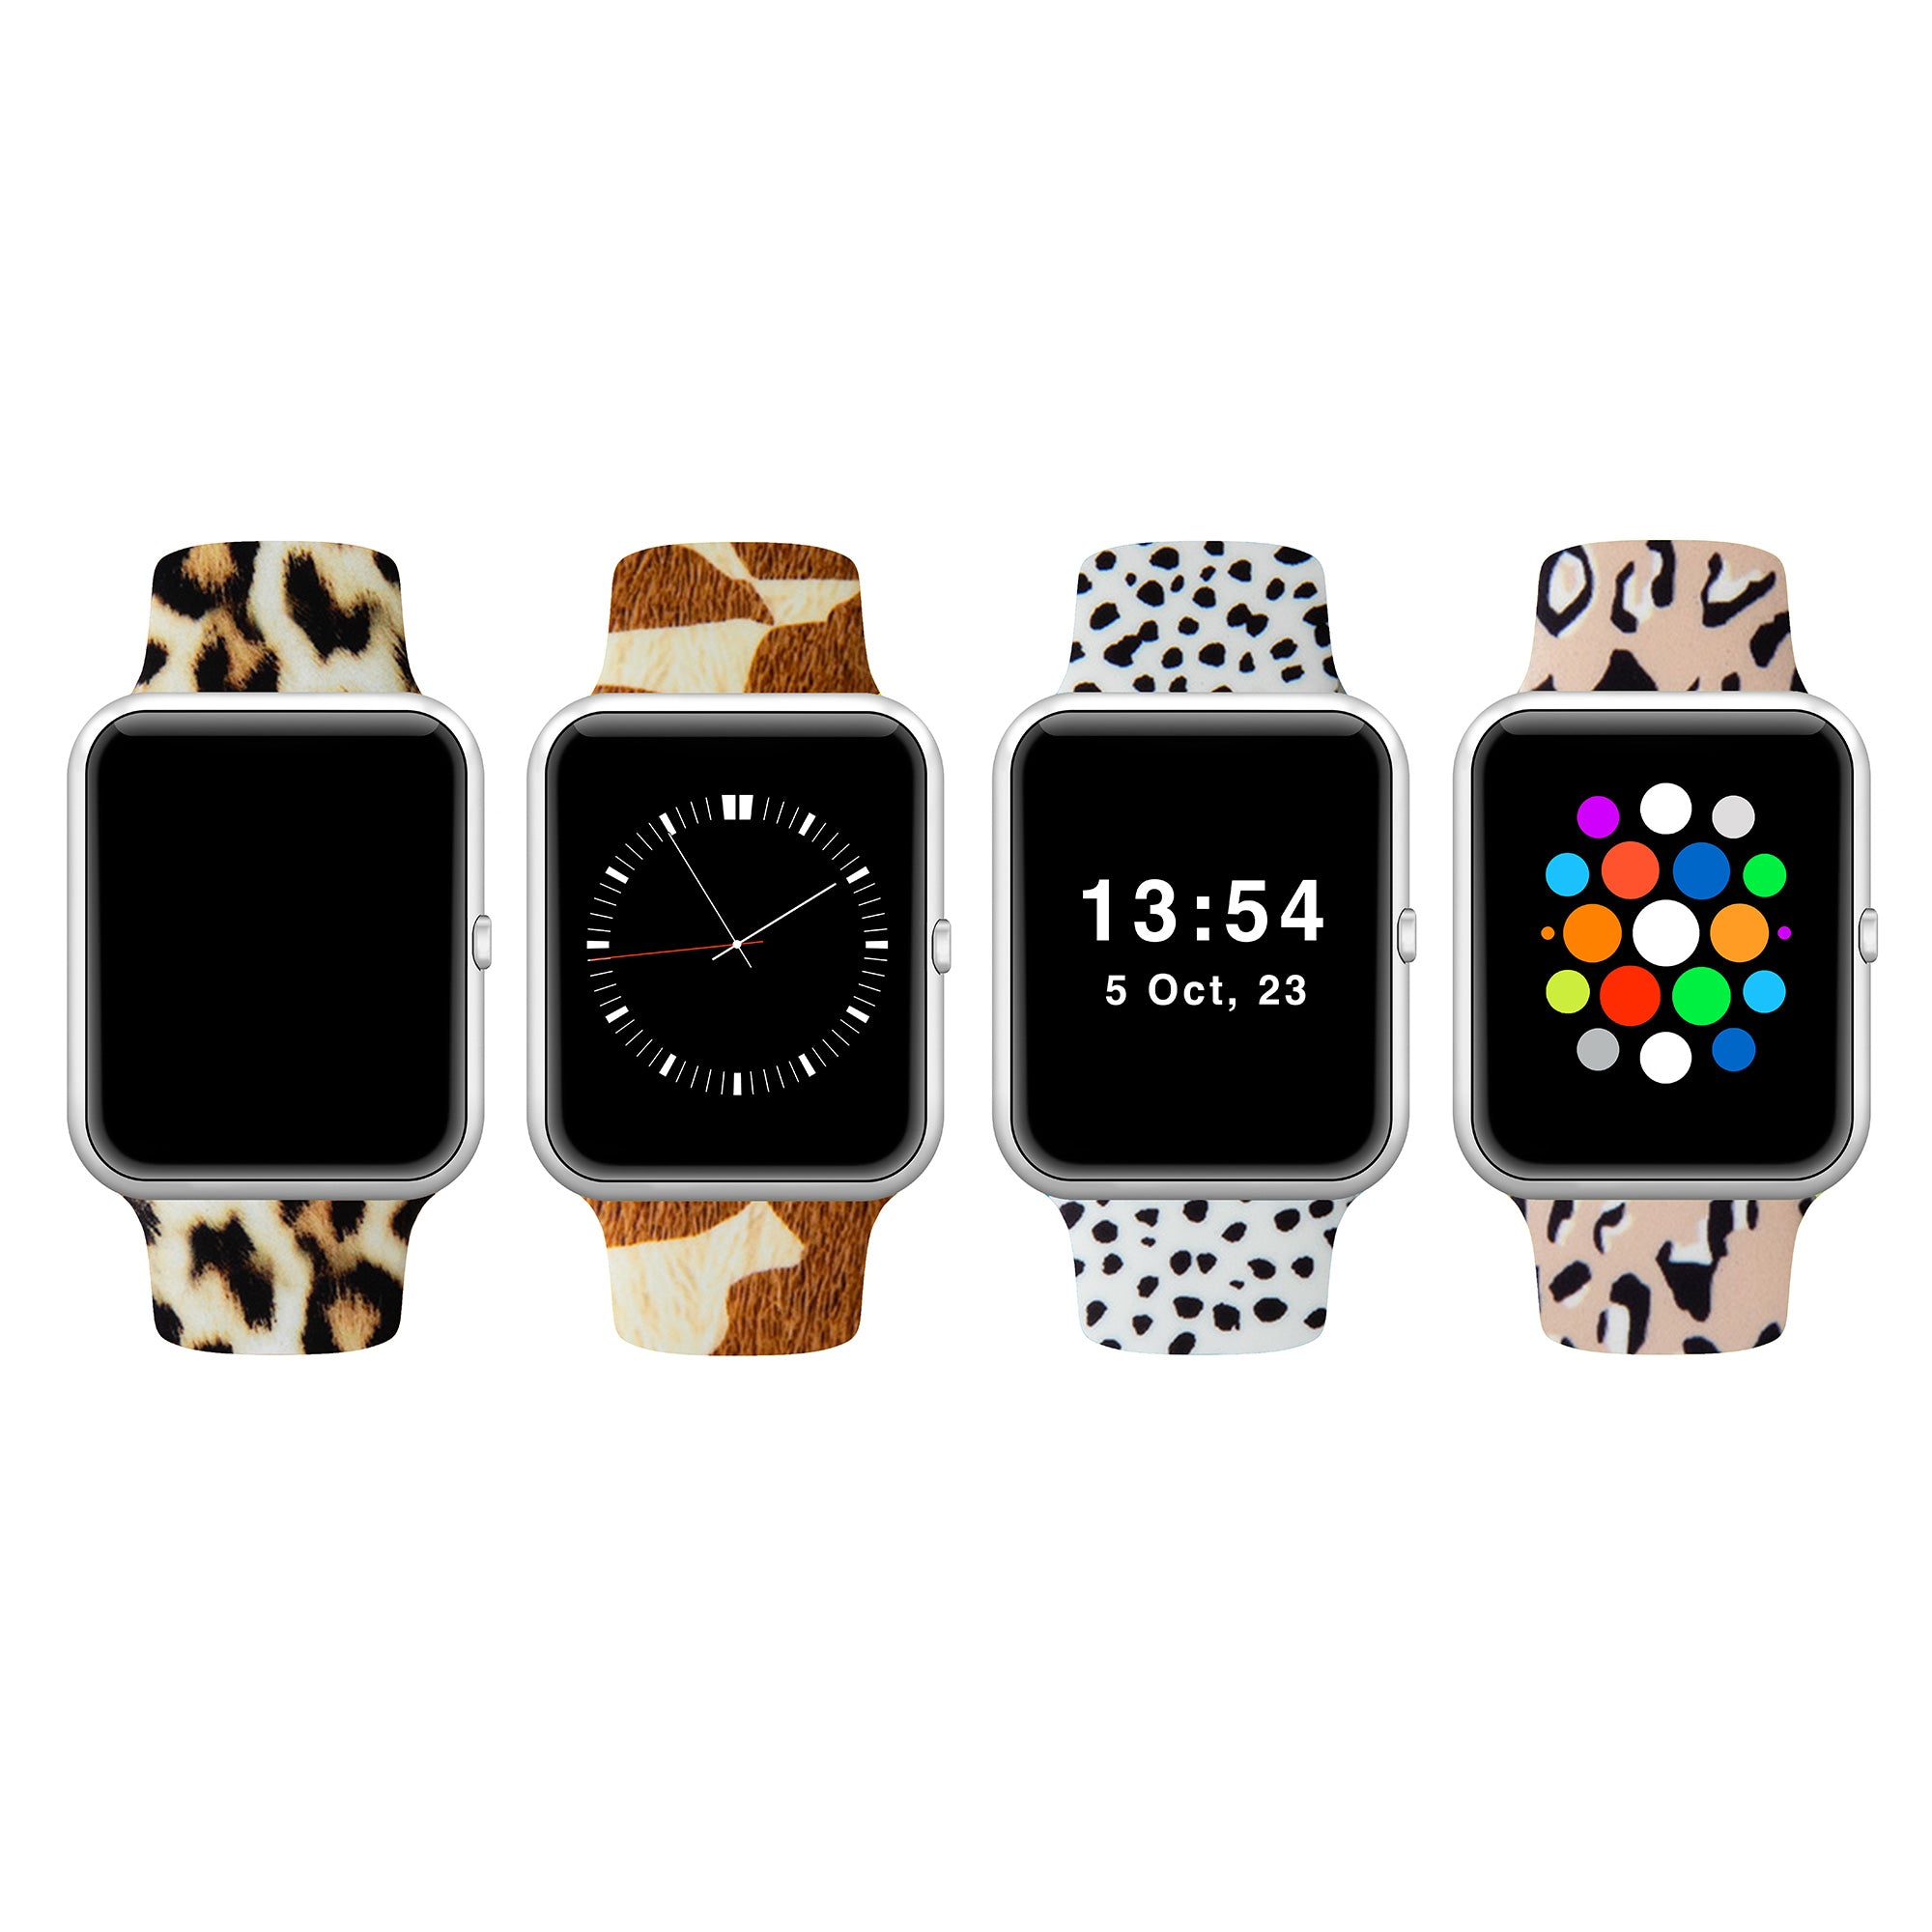 Patterned Silicone Apple Watch Band 38mm/40mm 42mm/44mm - Rainbow Paws - 38mm/40mm